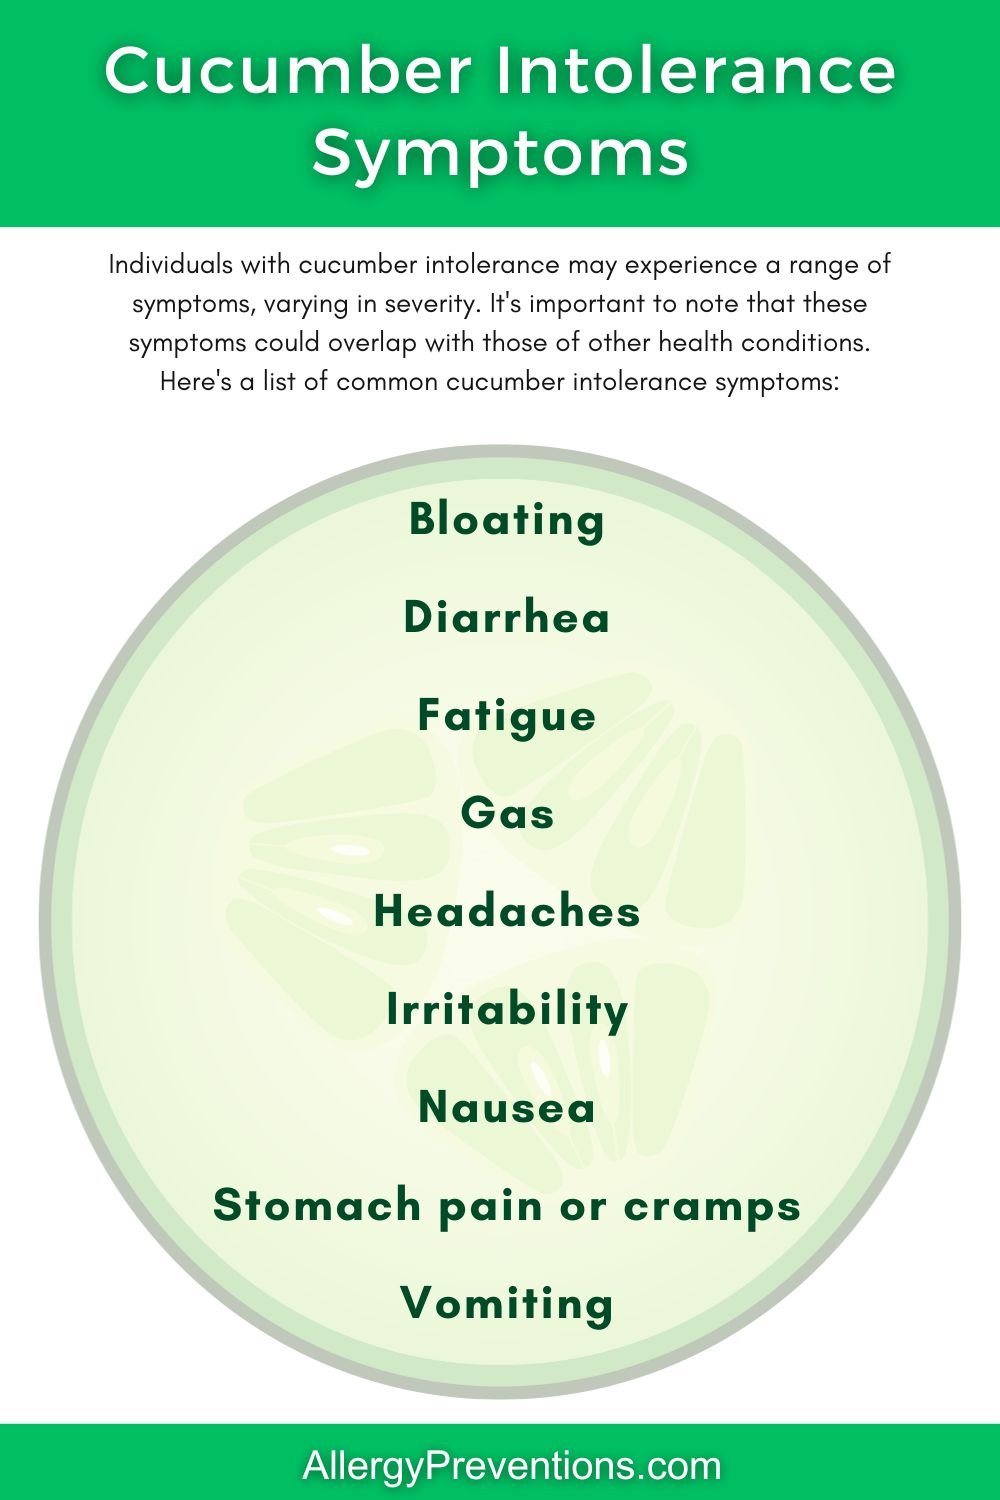 Cucumber Intolerance Symptoms Infographic. Individuals with cucumber intolerance may experience a range of symptoms, varying in severity. It's important to note that these symptoms could overlap with those of other health conditions. Here's a list of common cucumber intolerance symptoms: Bloating,, Diarrhea, Fatigue, Gas, Headaches, Irritability, Nausea, Stomach pain or cramps, Vomiting.